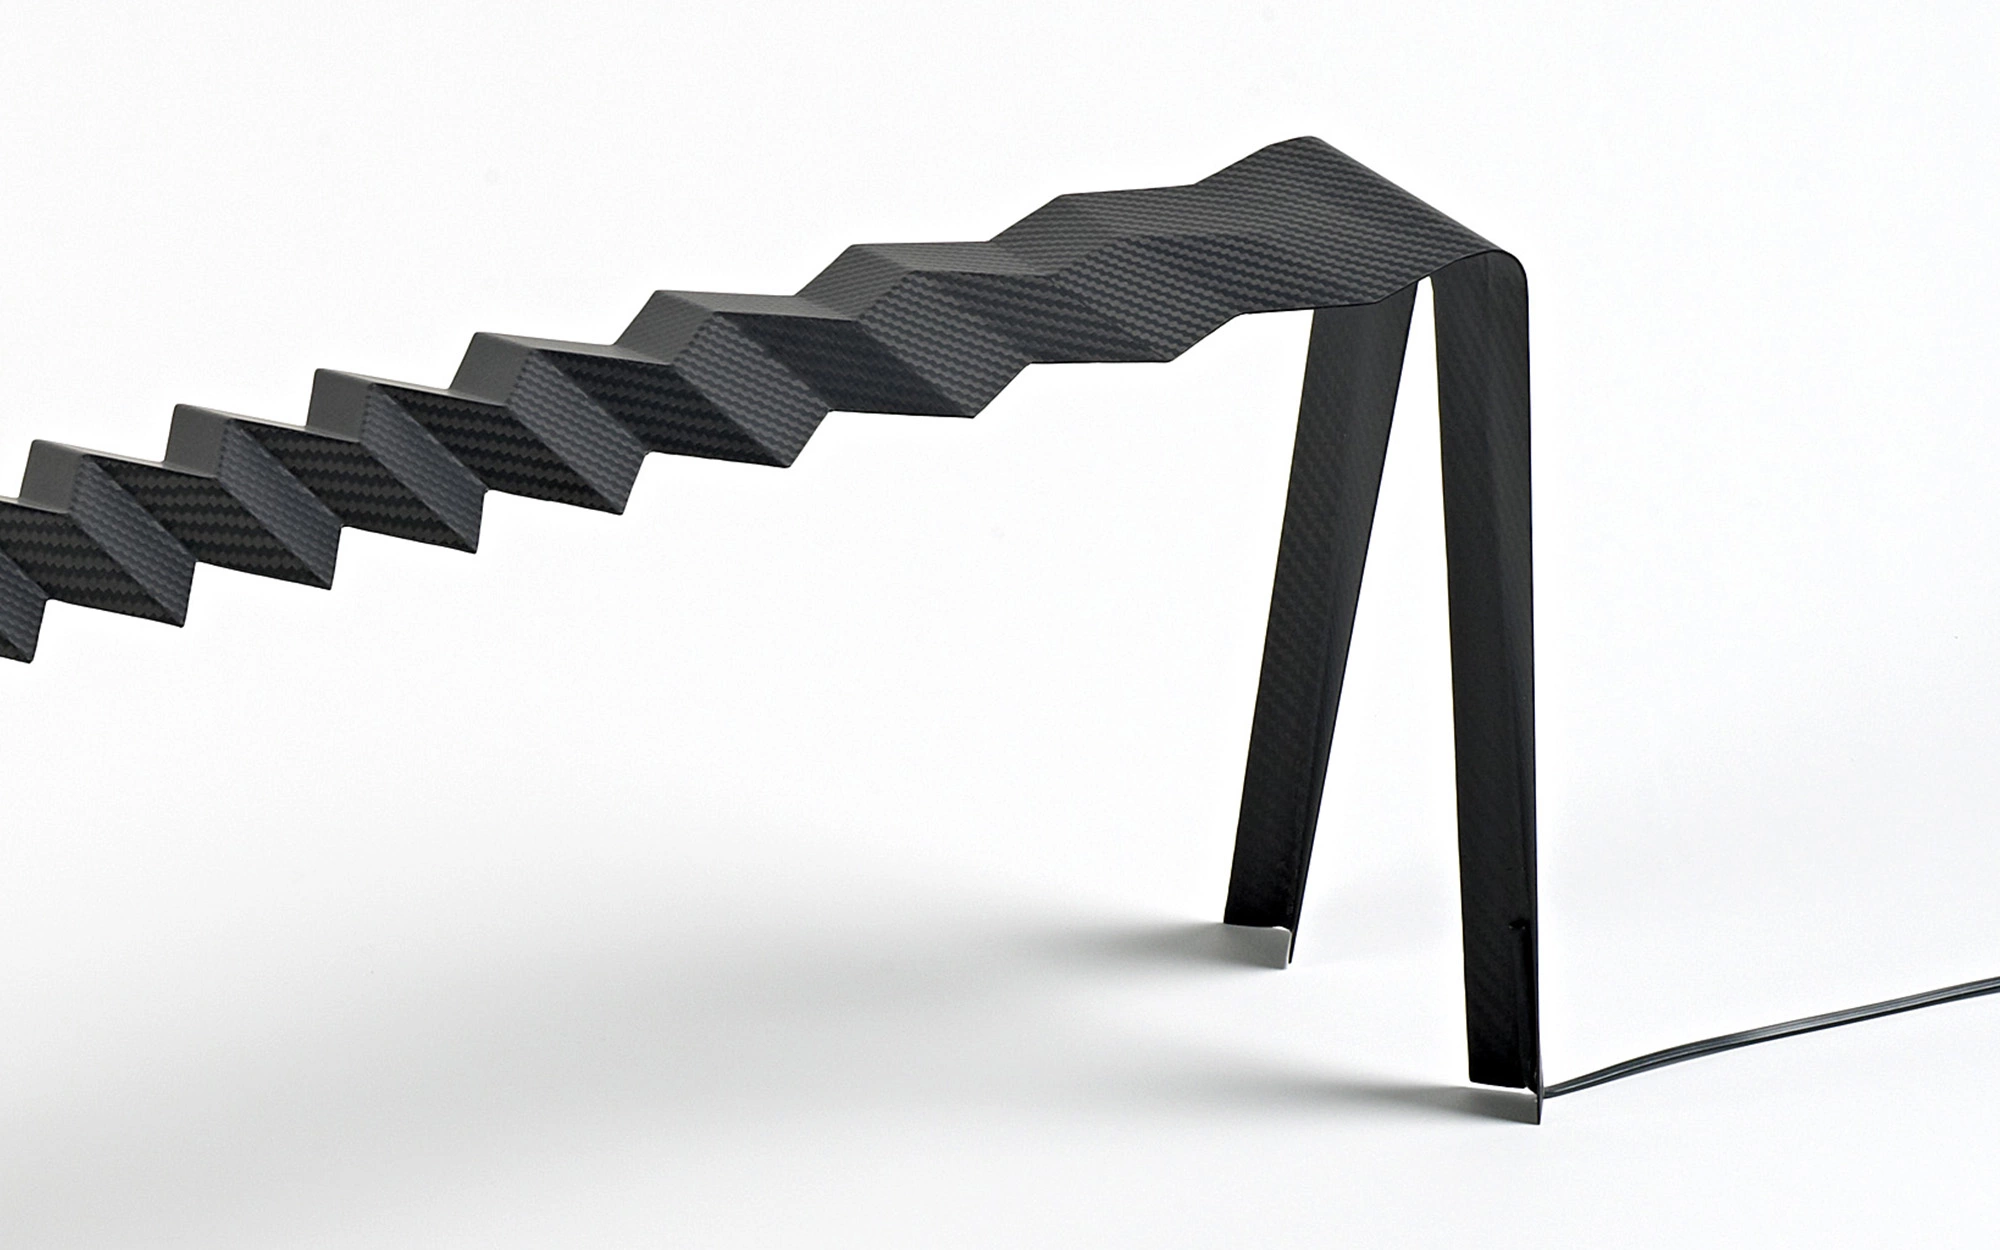 Slim and Strong - Delphine Frey - Table light - Galerie kreo